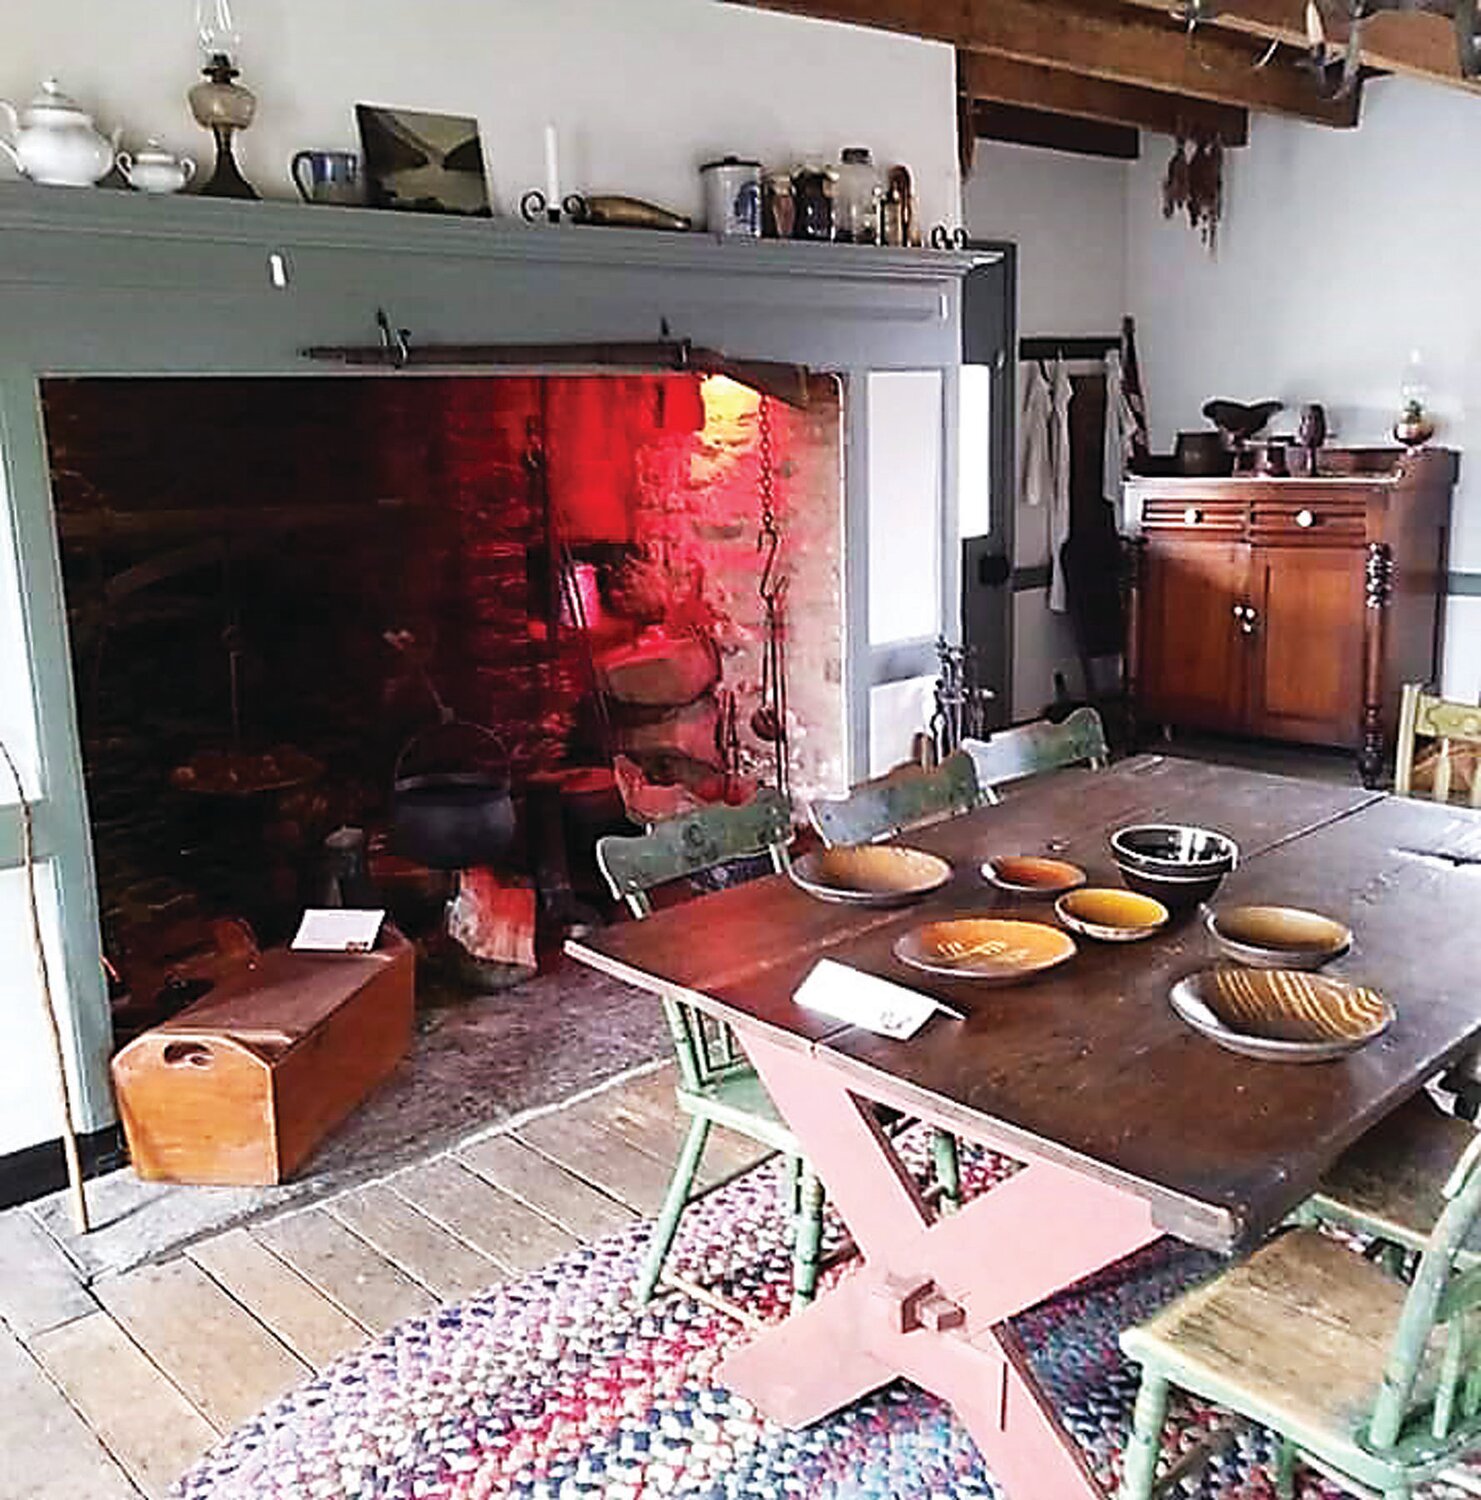 With its large hearth fireplace, the kitchen would have been the Burgess Folke House’s main gathering place or greeting room.